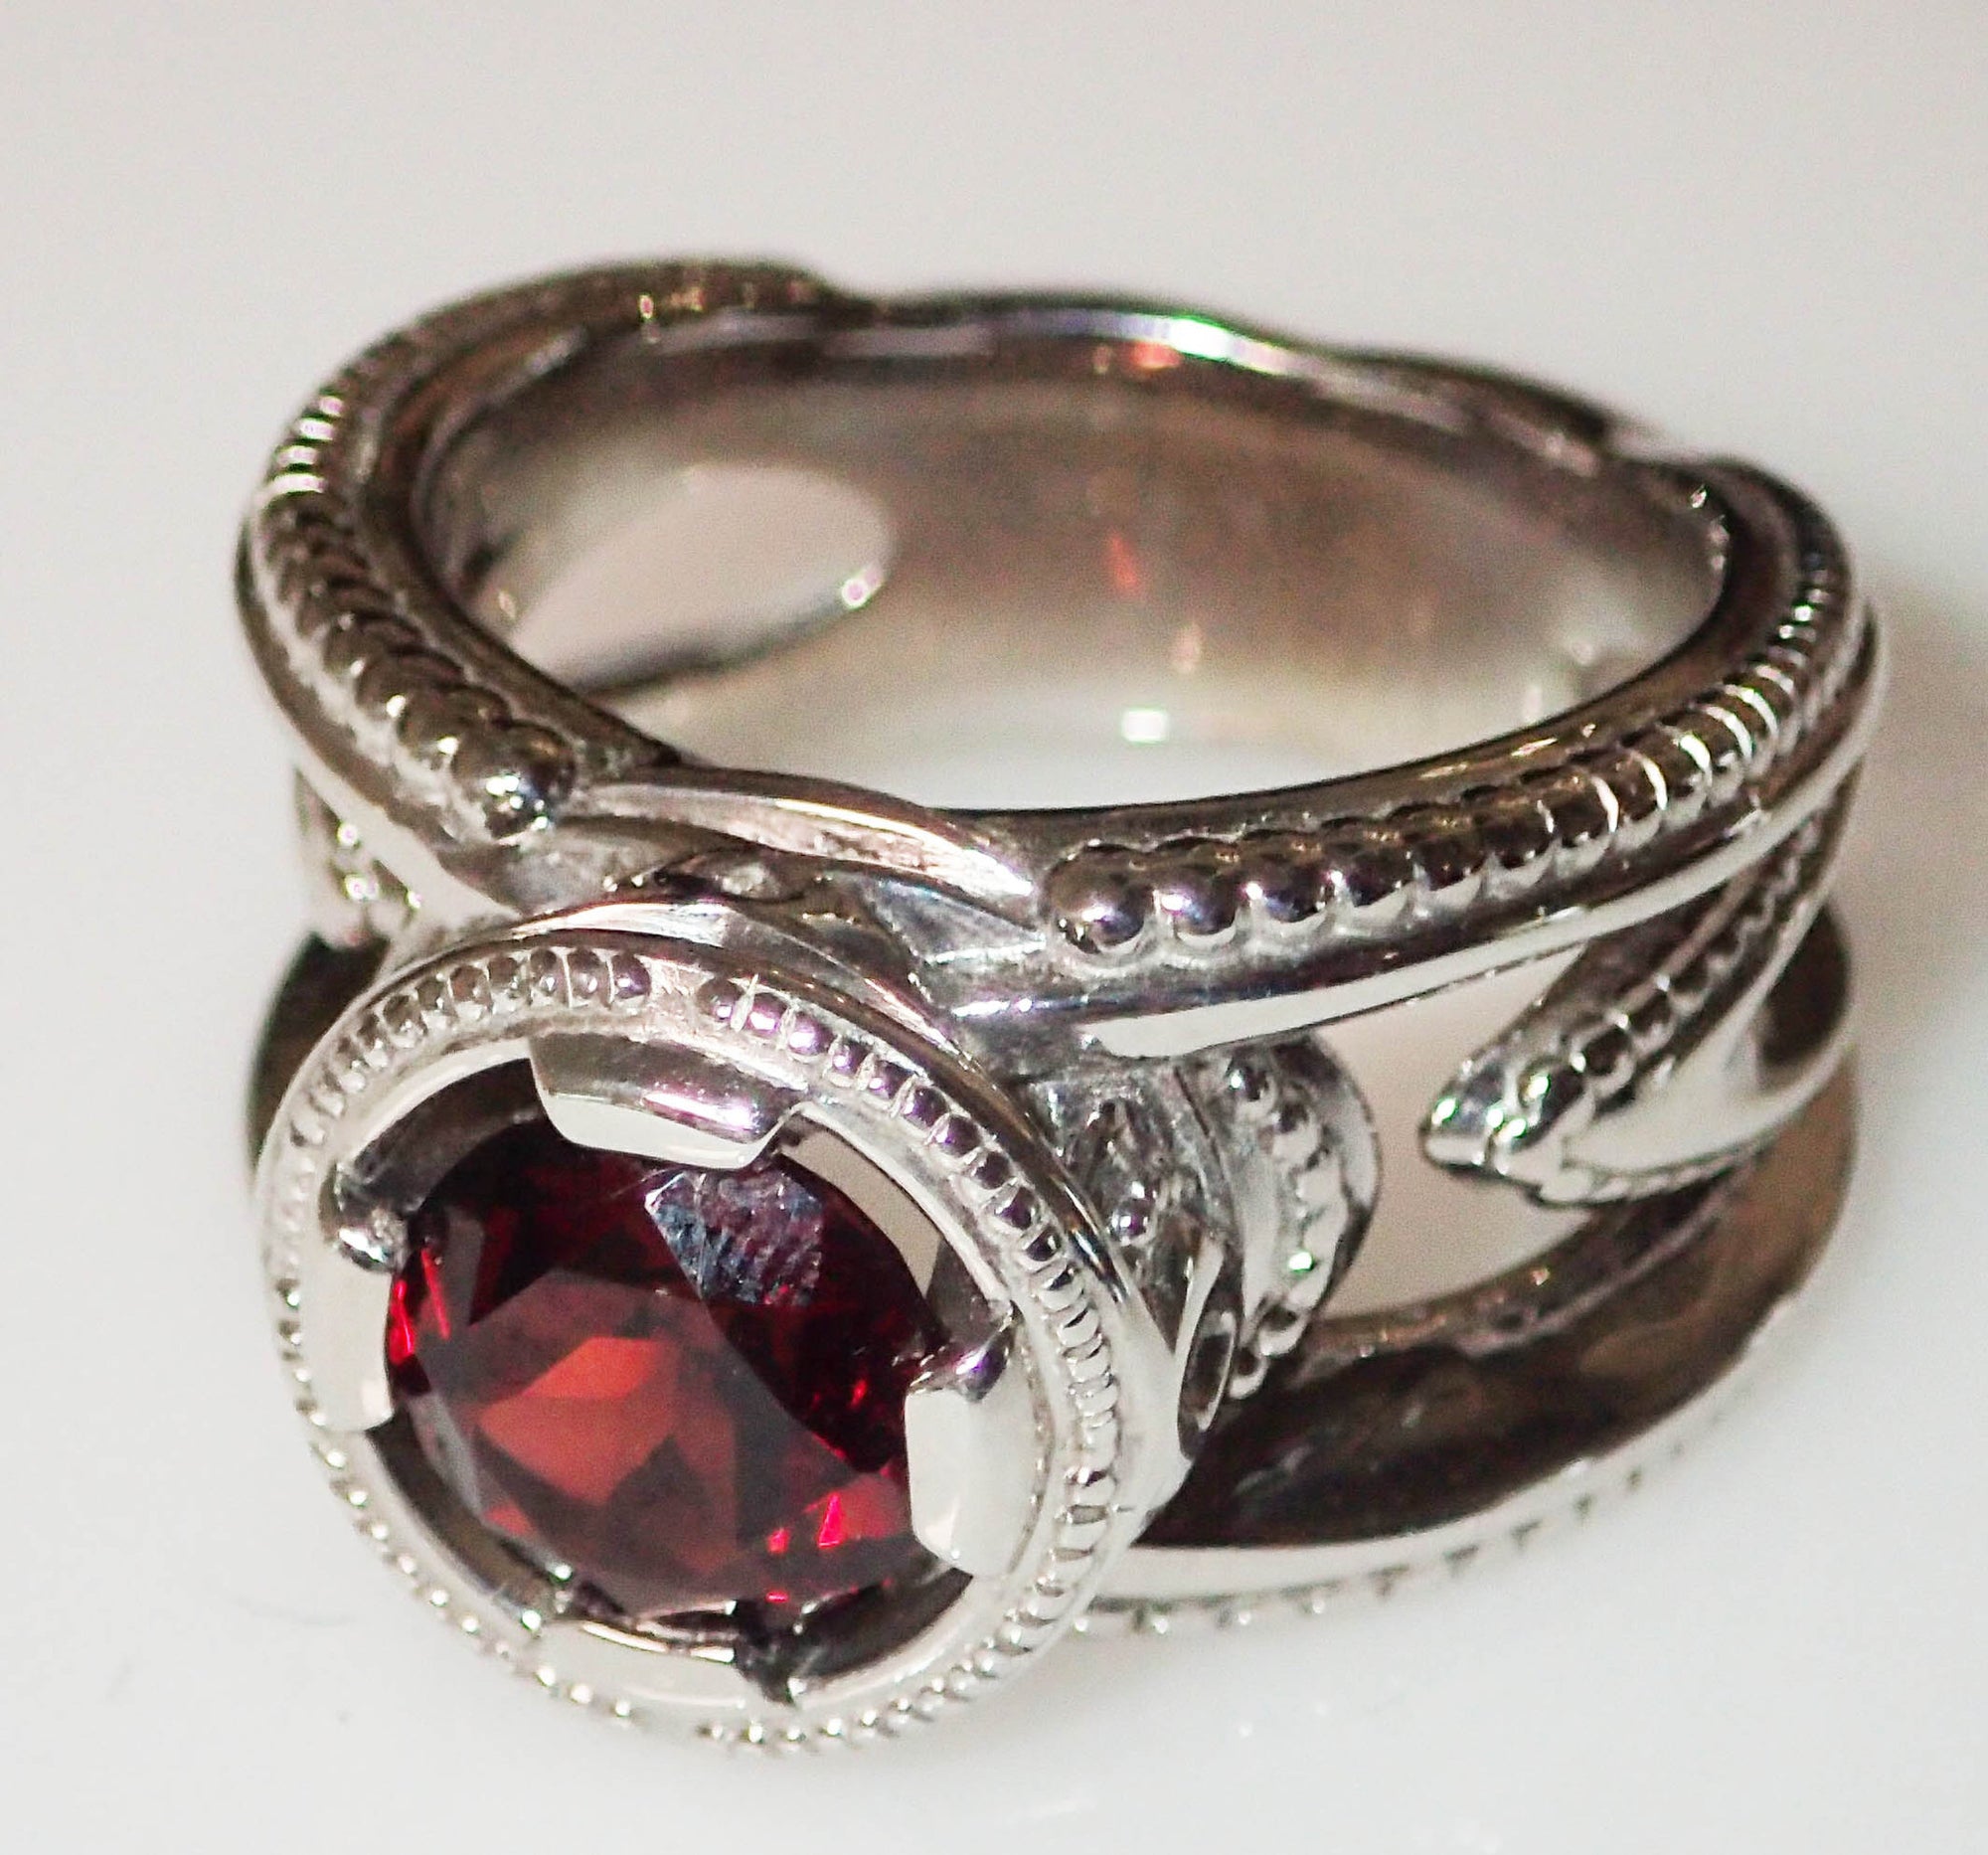 "Water Drop" Mozambique Garnet Ring by Geoff Thomas - Talisman Collection Fine Jewelers